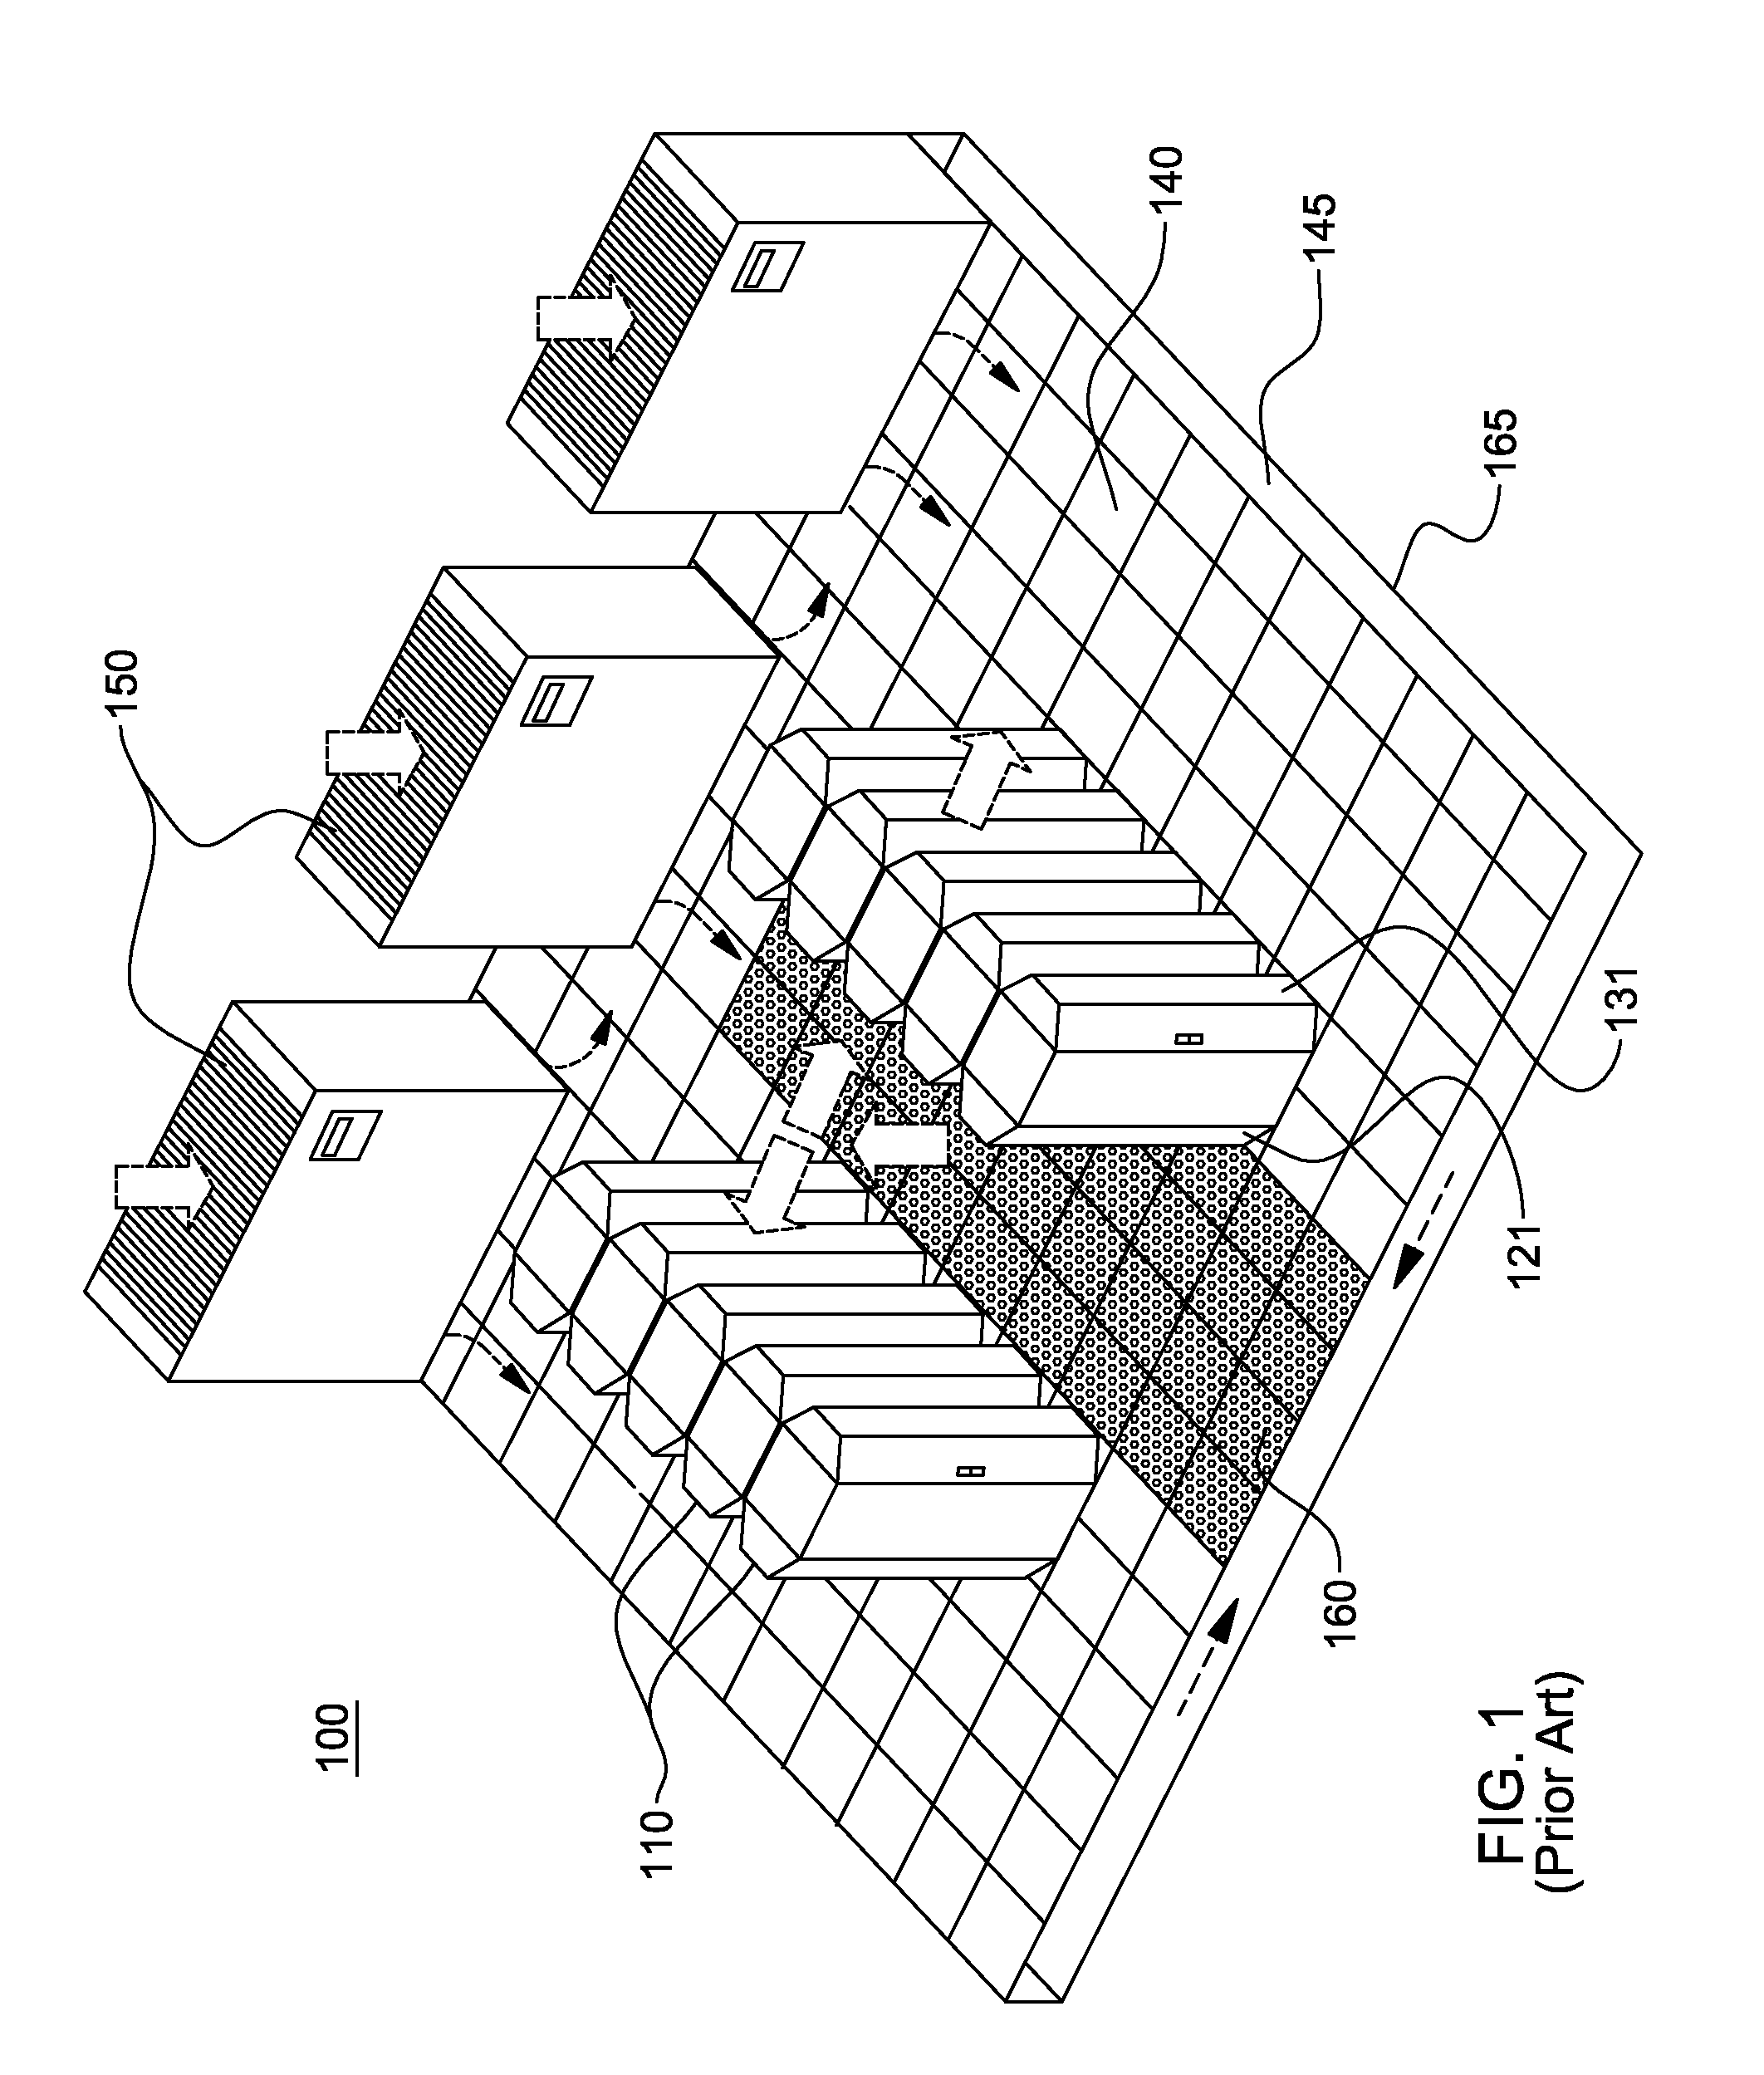 Apparatus and method for facilitating cooling of an electronics system